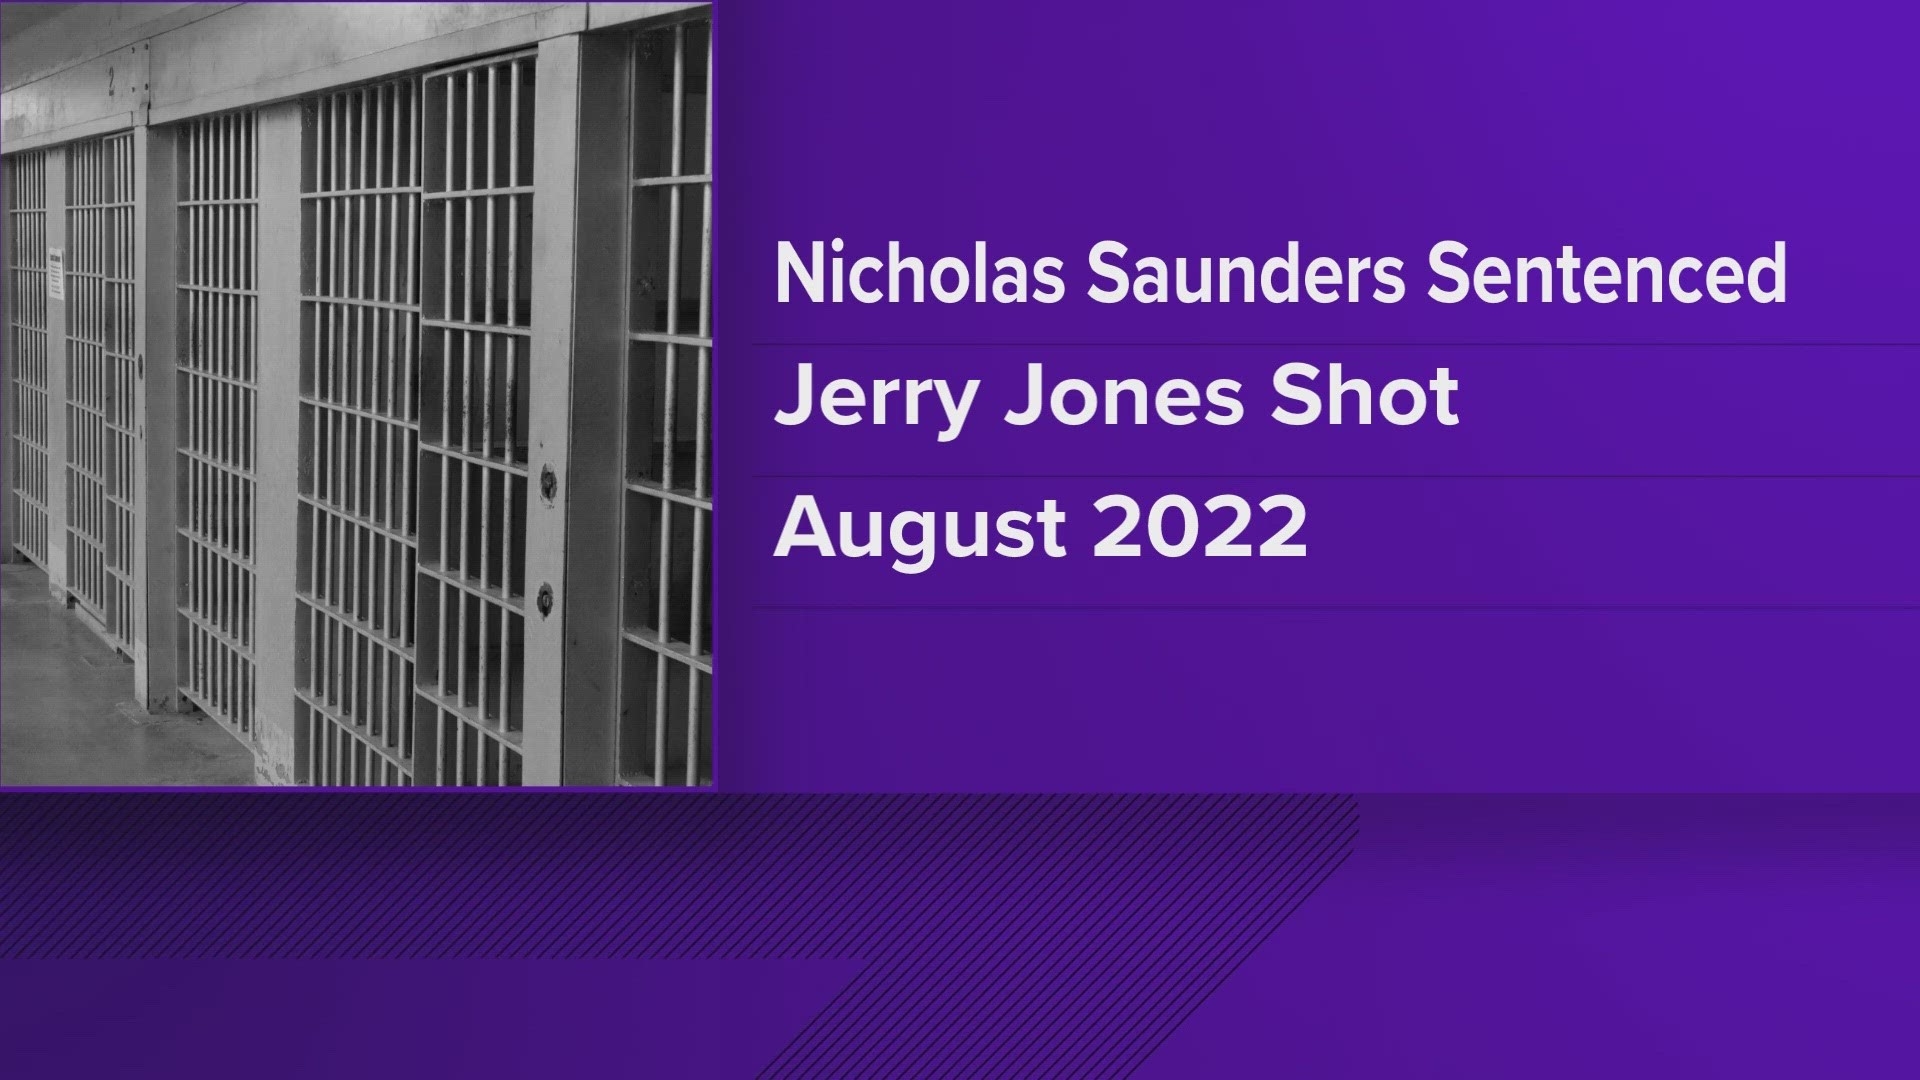 A Johnson County jury convicted Nicholas Saunders after he shot 38-year-old Jerry Jones multiple times.